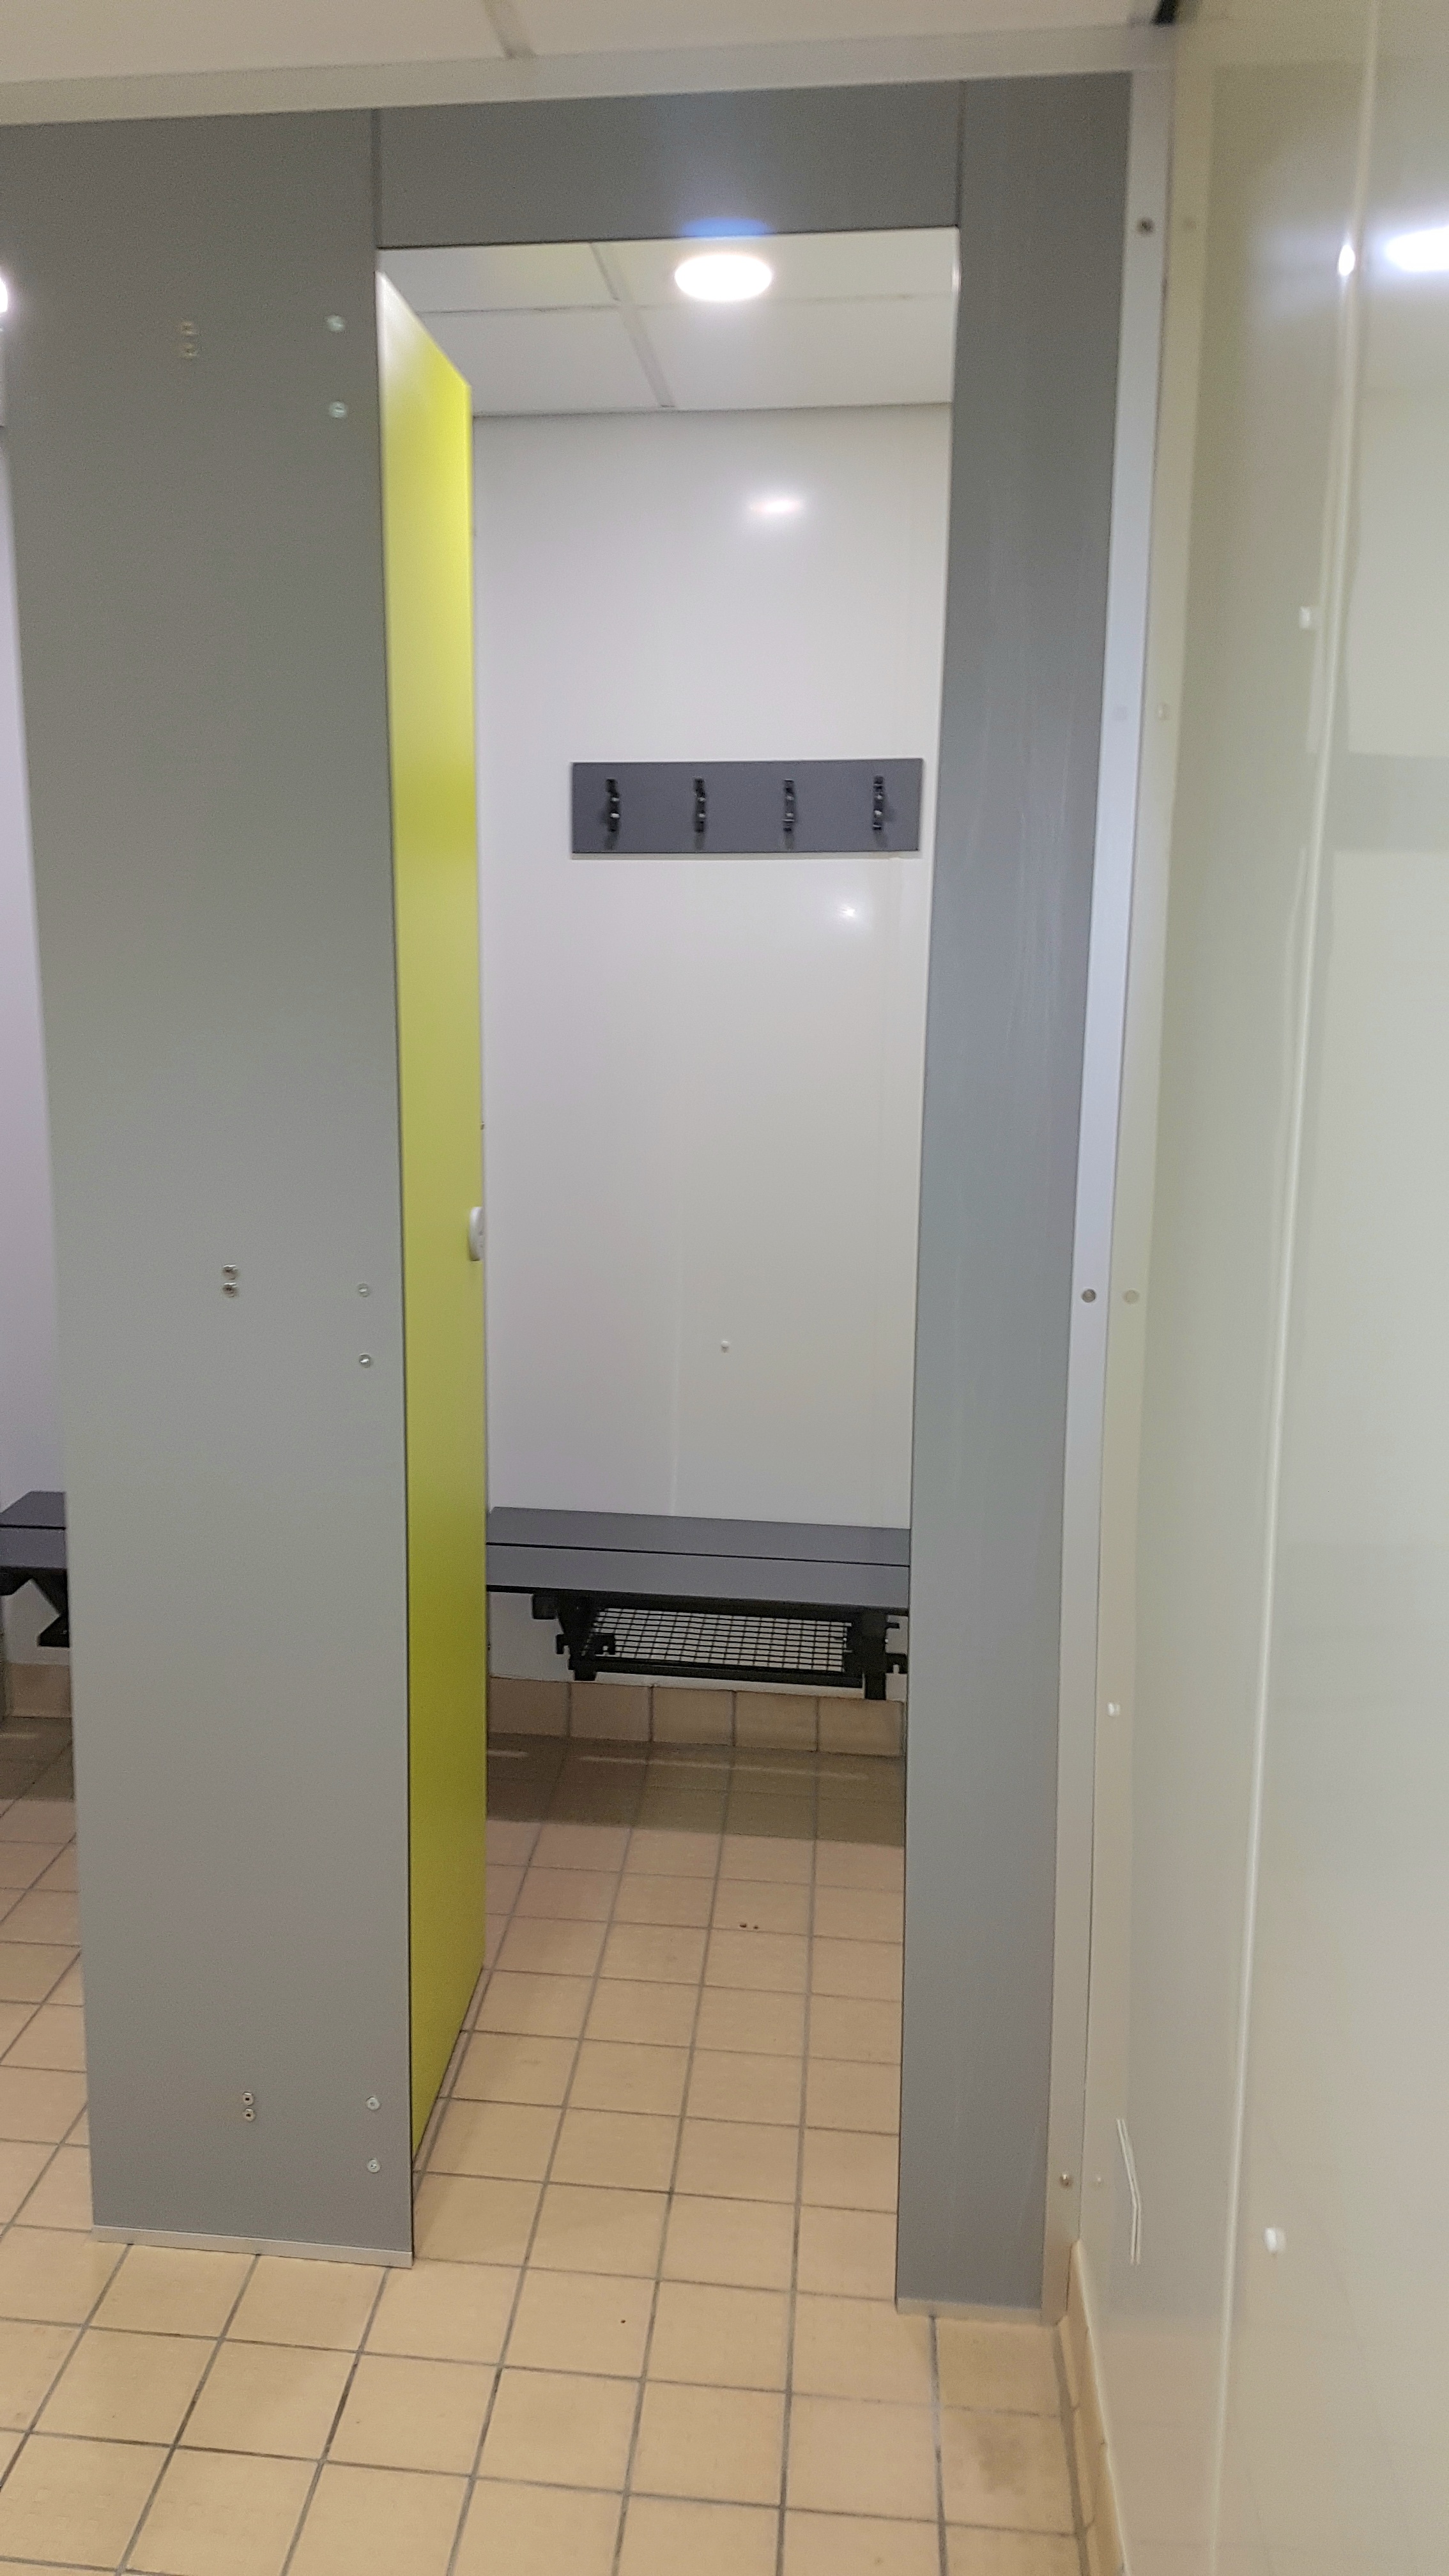 Changing rooms designed and installed by Skobex Washrooms